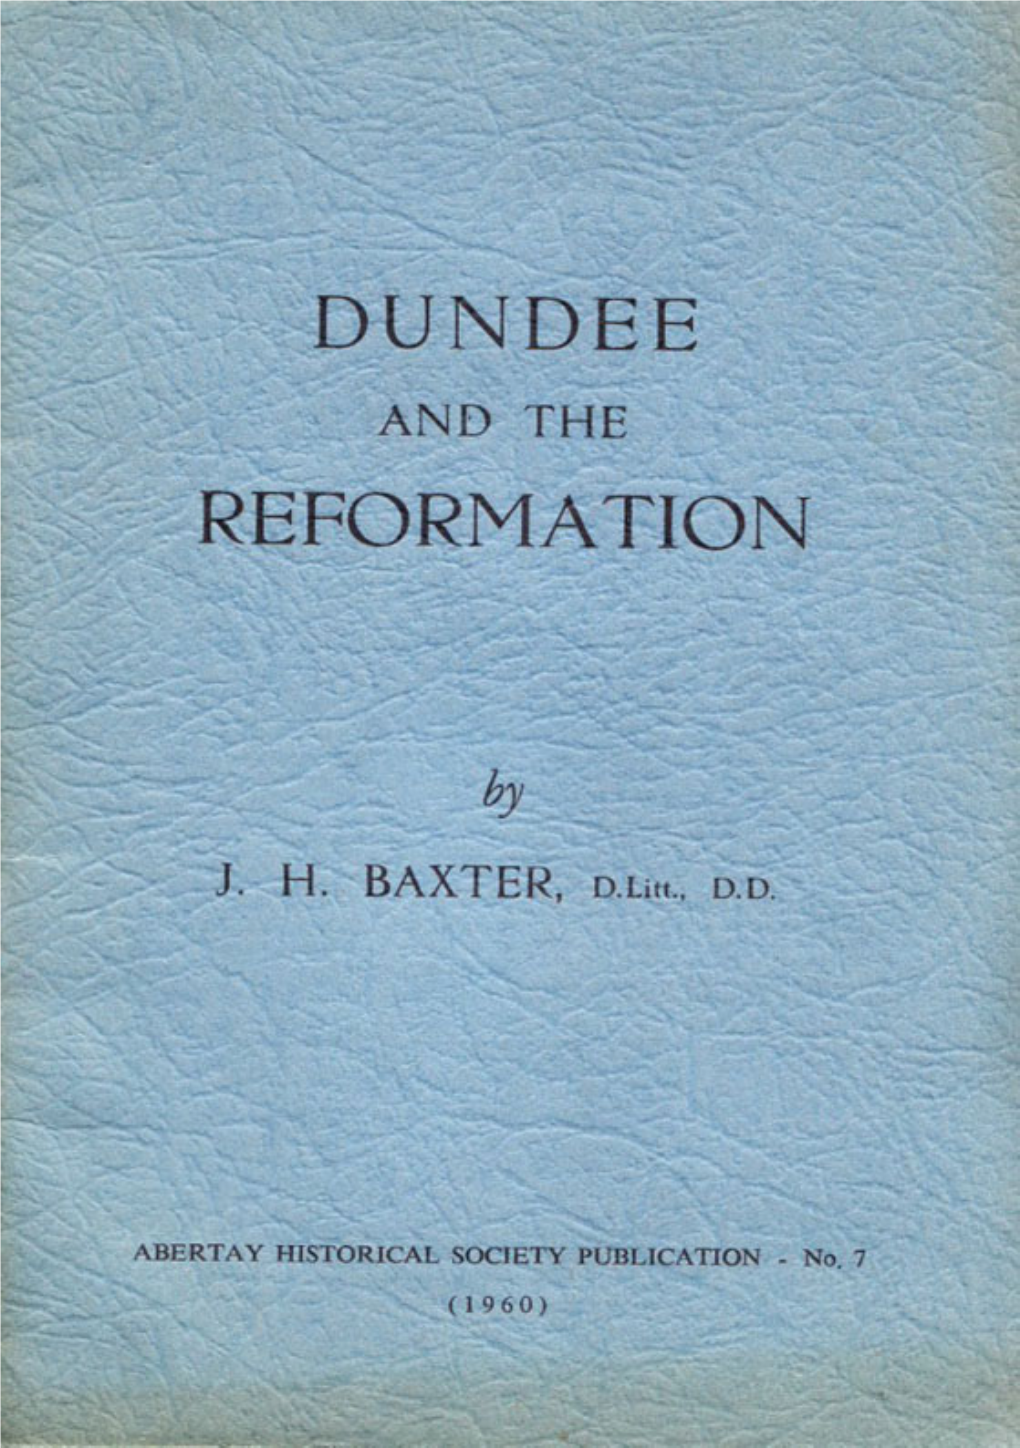 Dundee and the Reformation